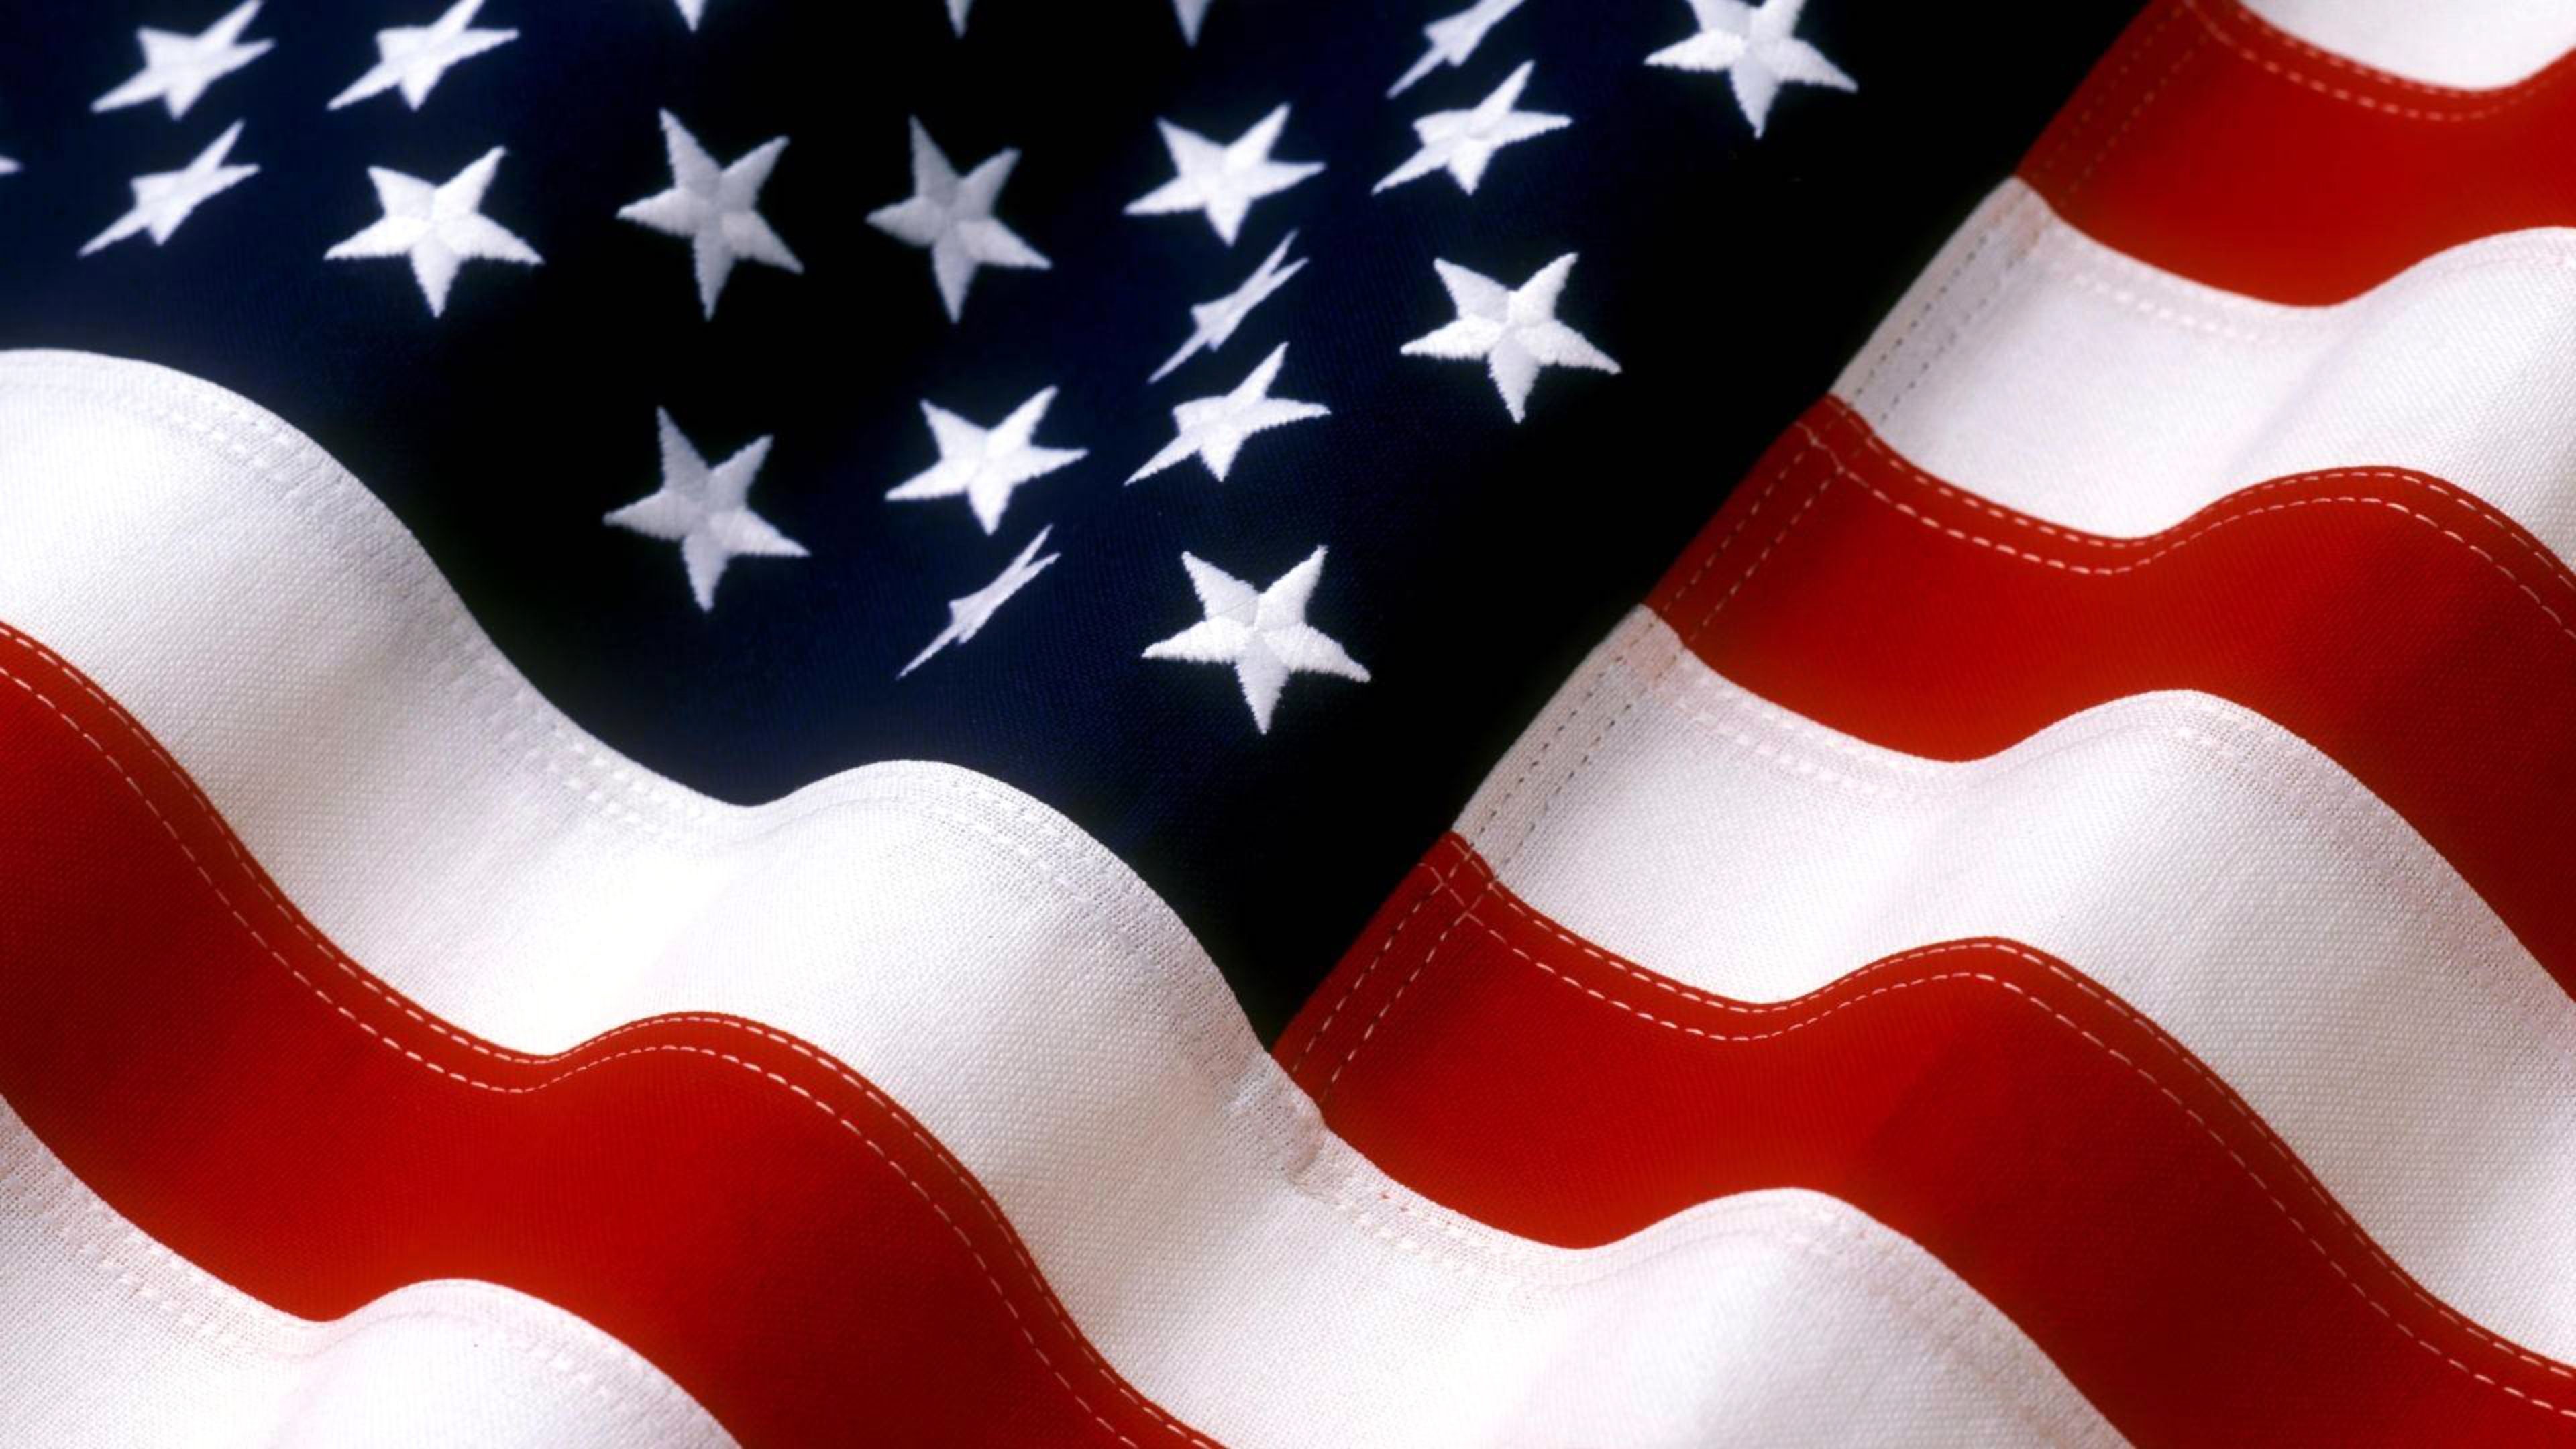 3840x2160 4th of july image hd desktop wallpapers amazing colourful background photos  download free best windows 3840